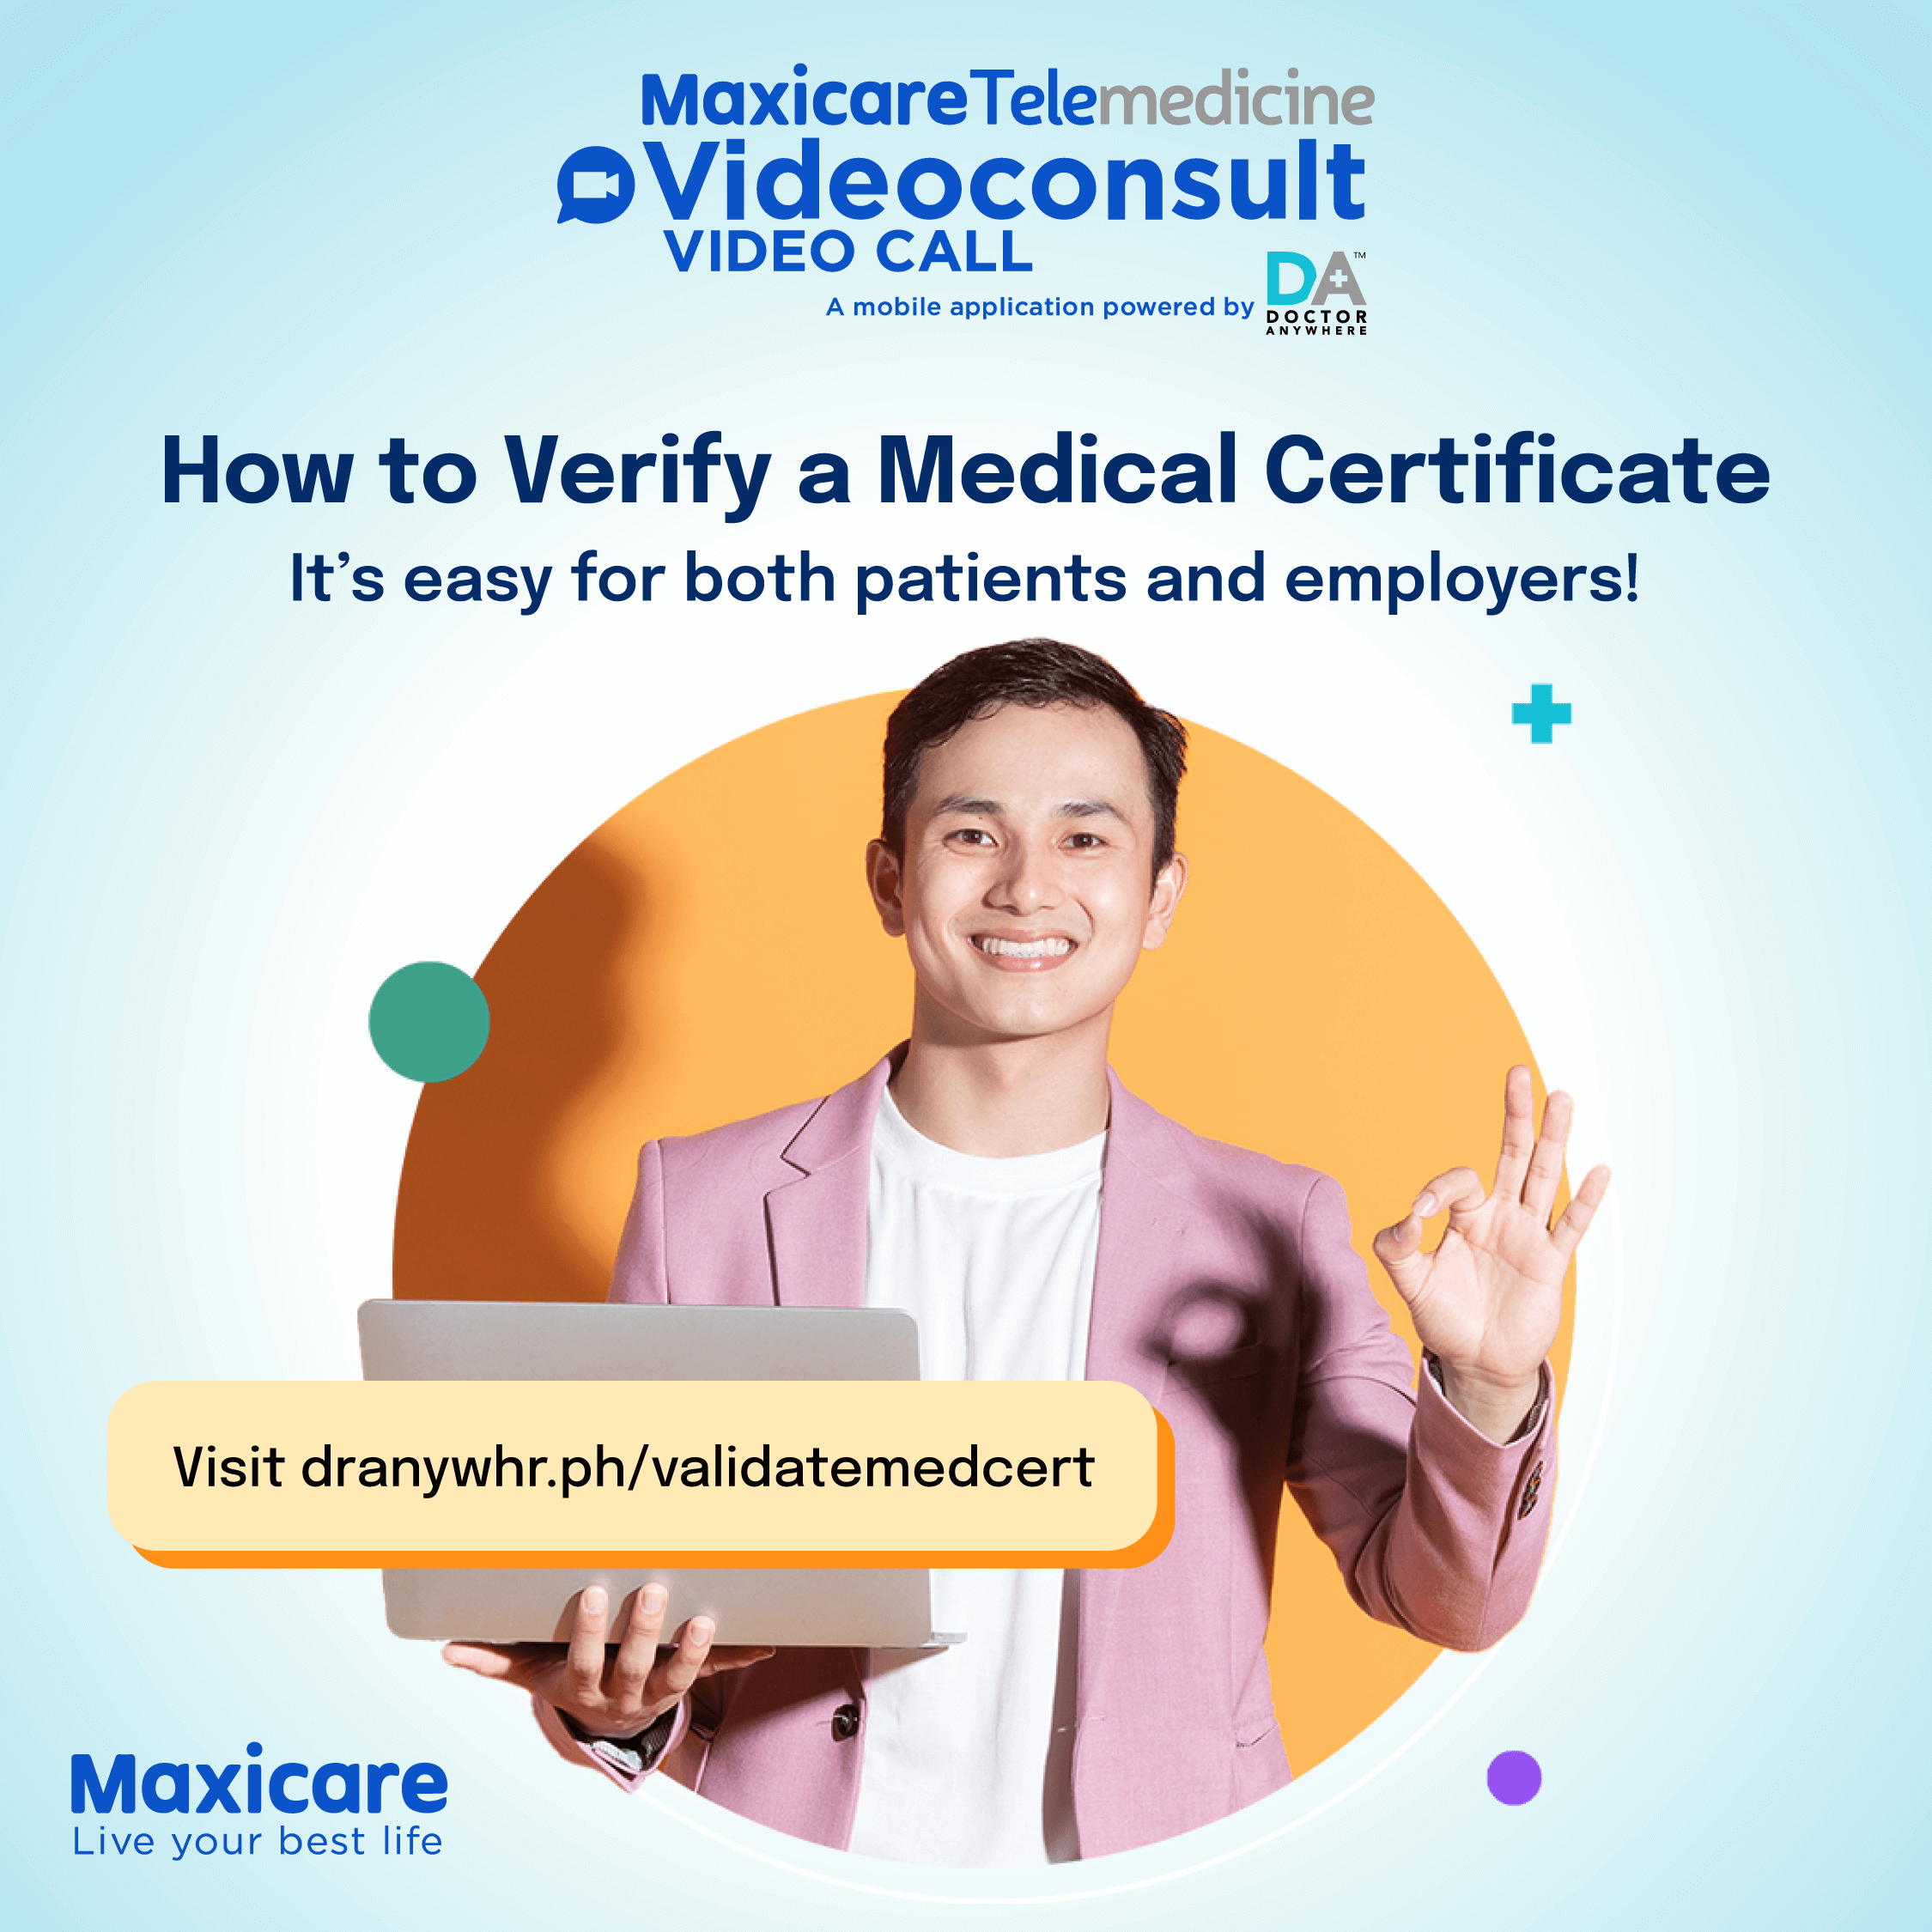 Easily Verify Medical Certificates with Maxicare